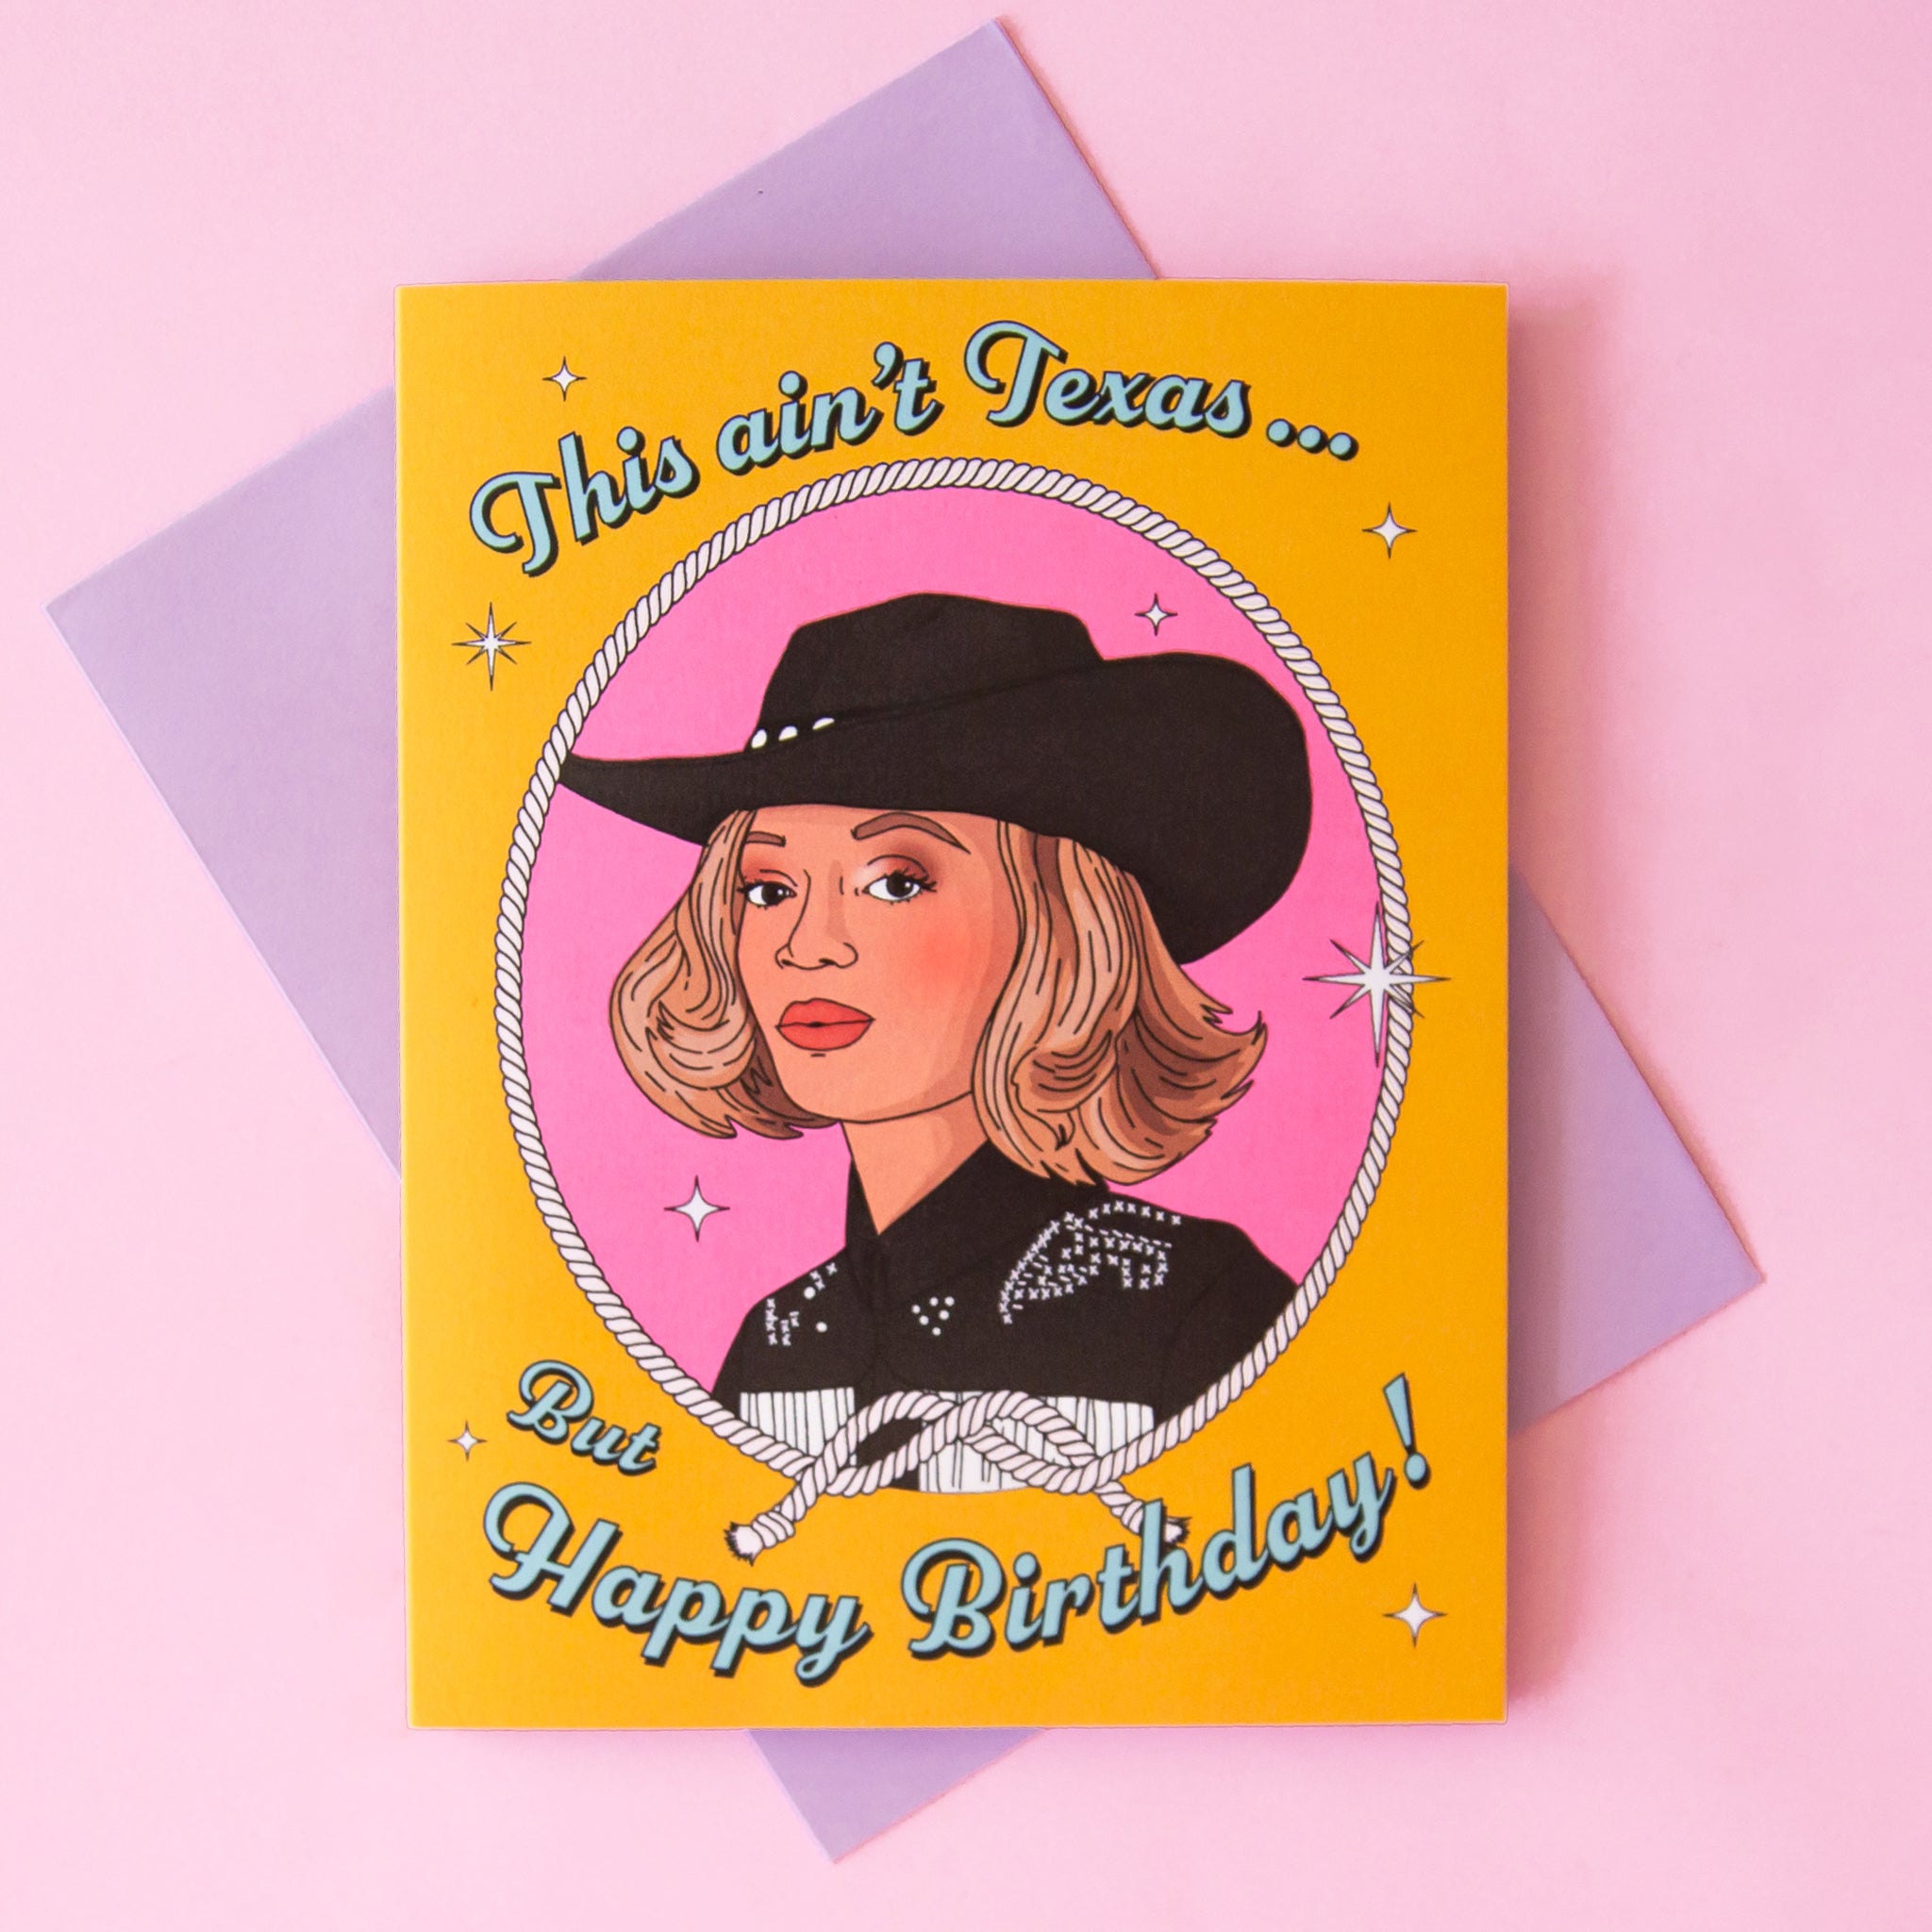 On a pink background is a yellow card with a rope circle around an illustration of Beyonce wearing a cowgirl hat and text above and below that reads, "This ain't Texas... But Happy Birthday". 